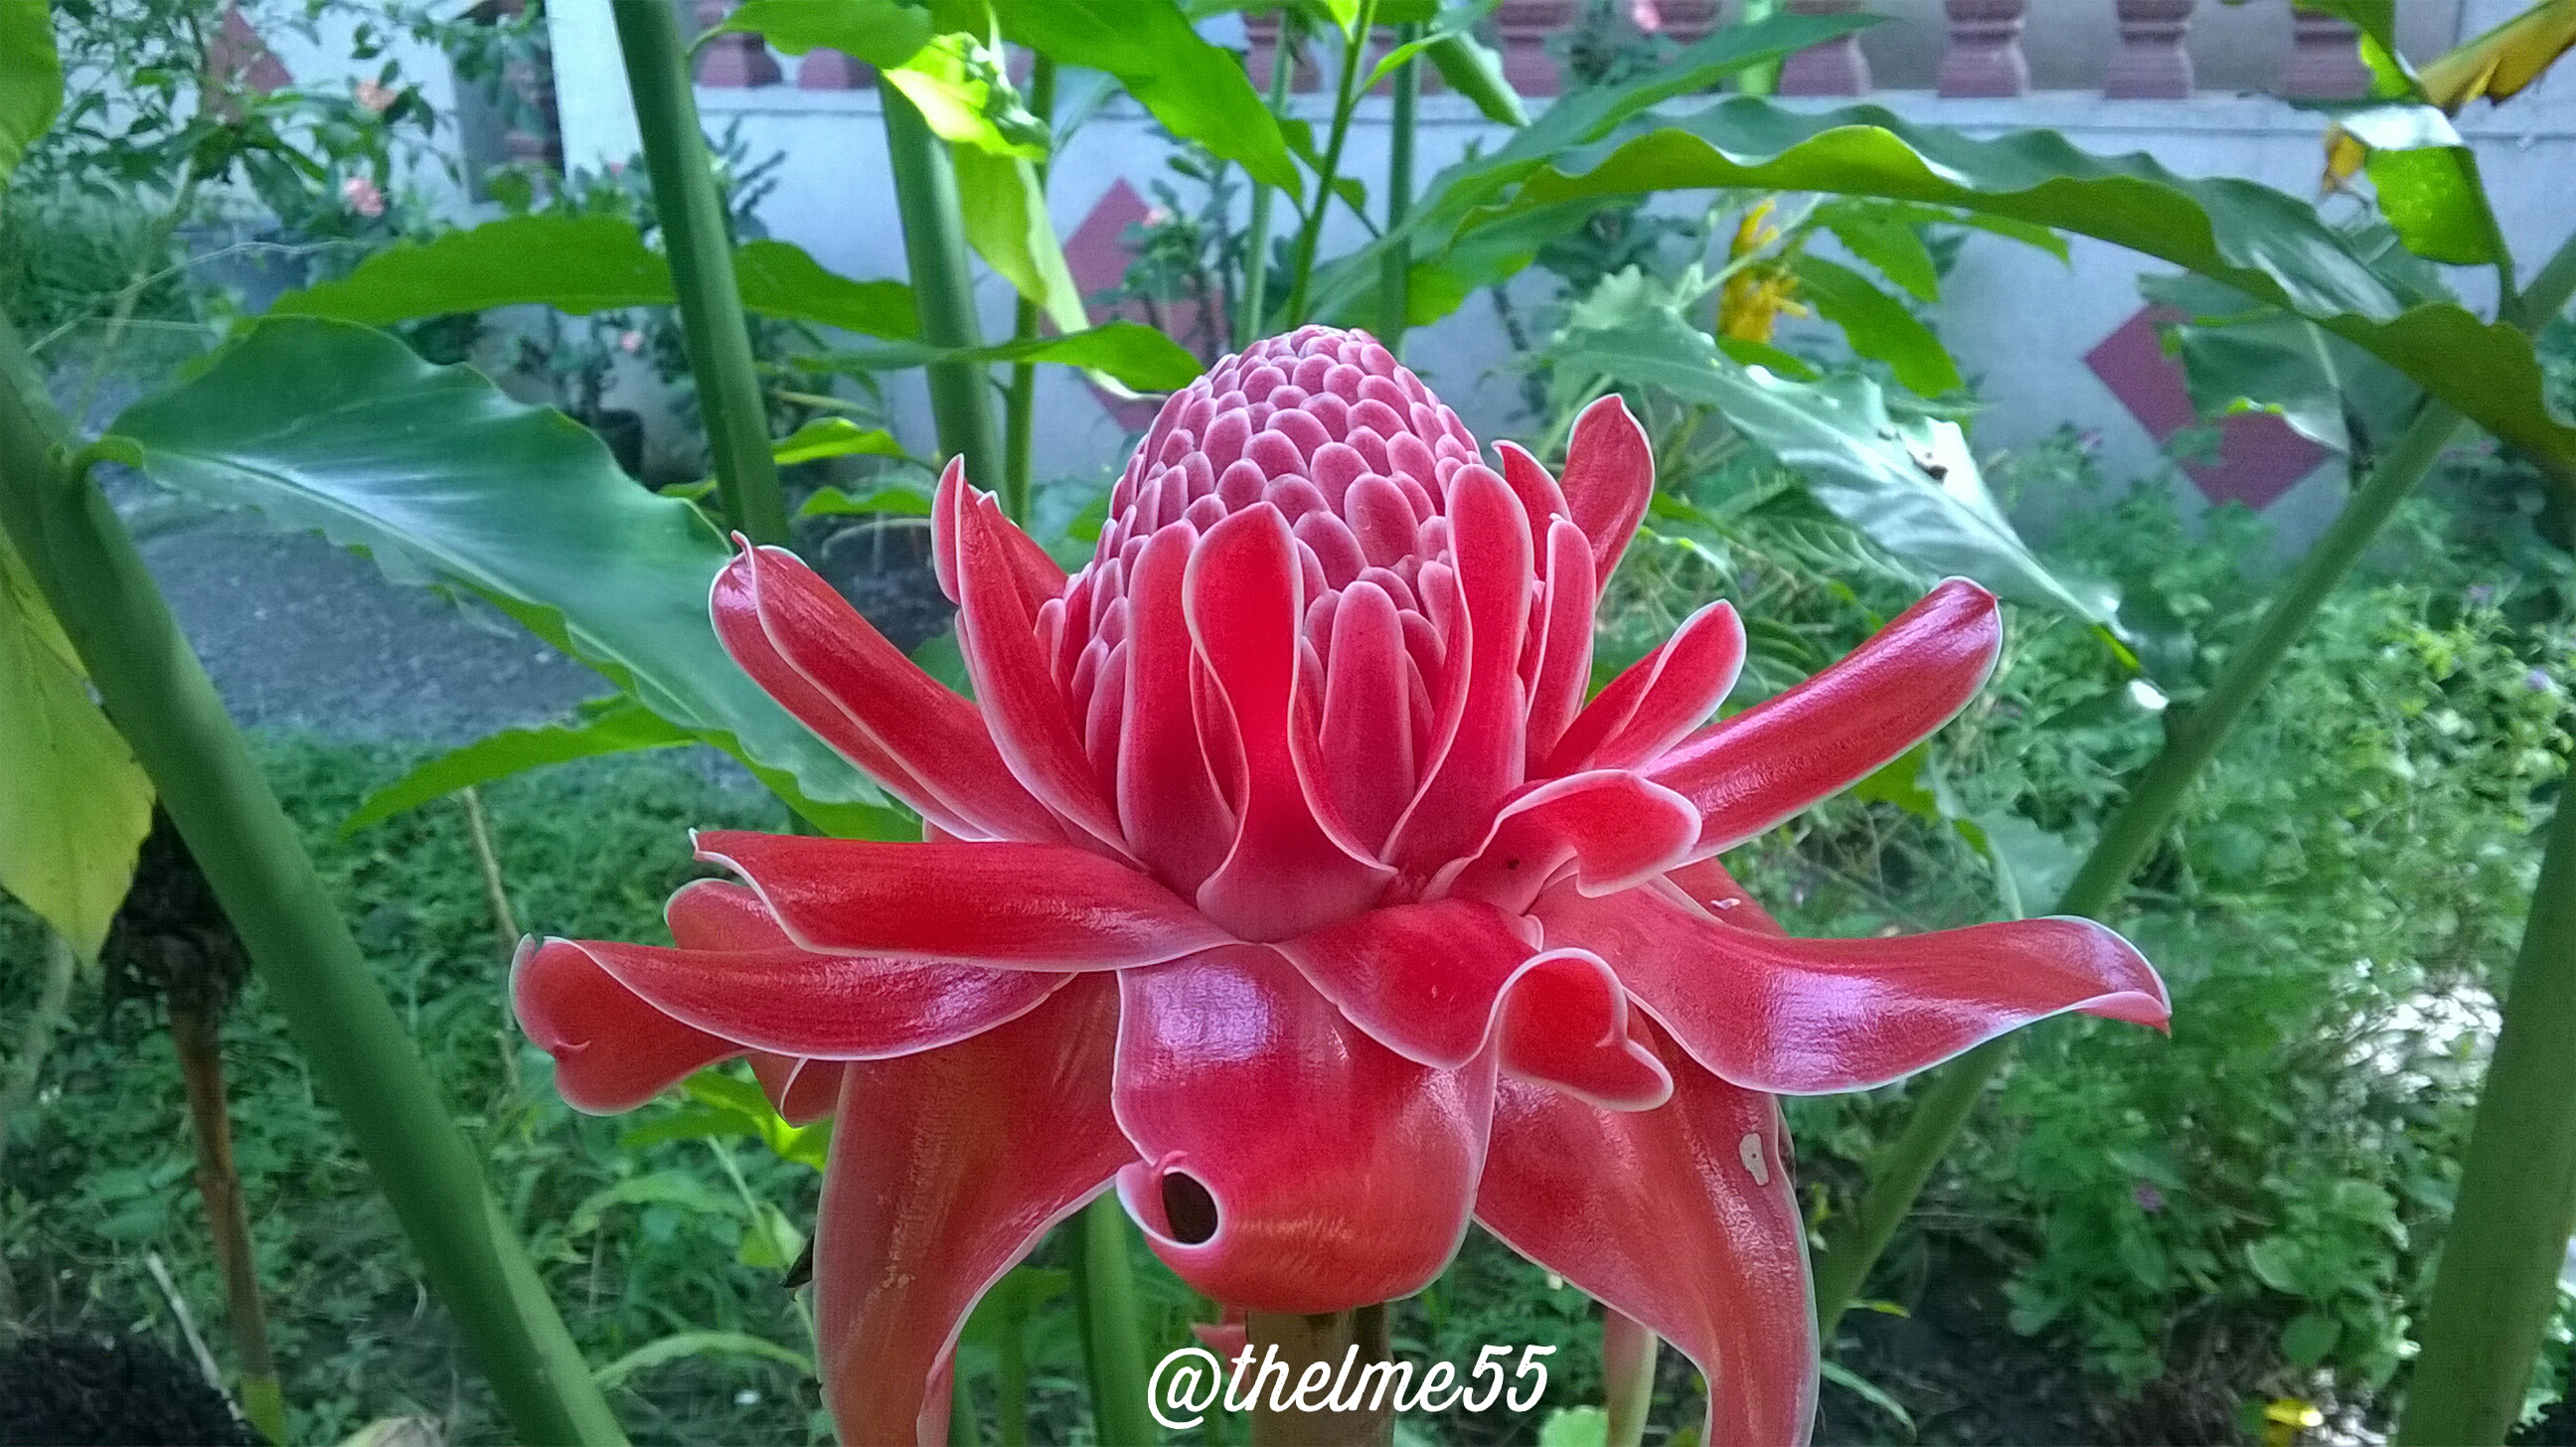 Torch ginger for my late mother